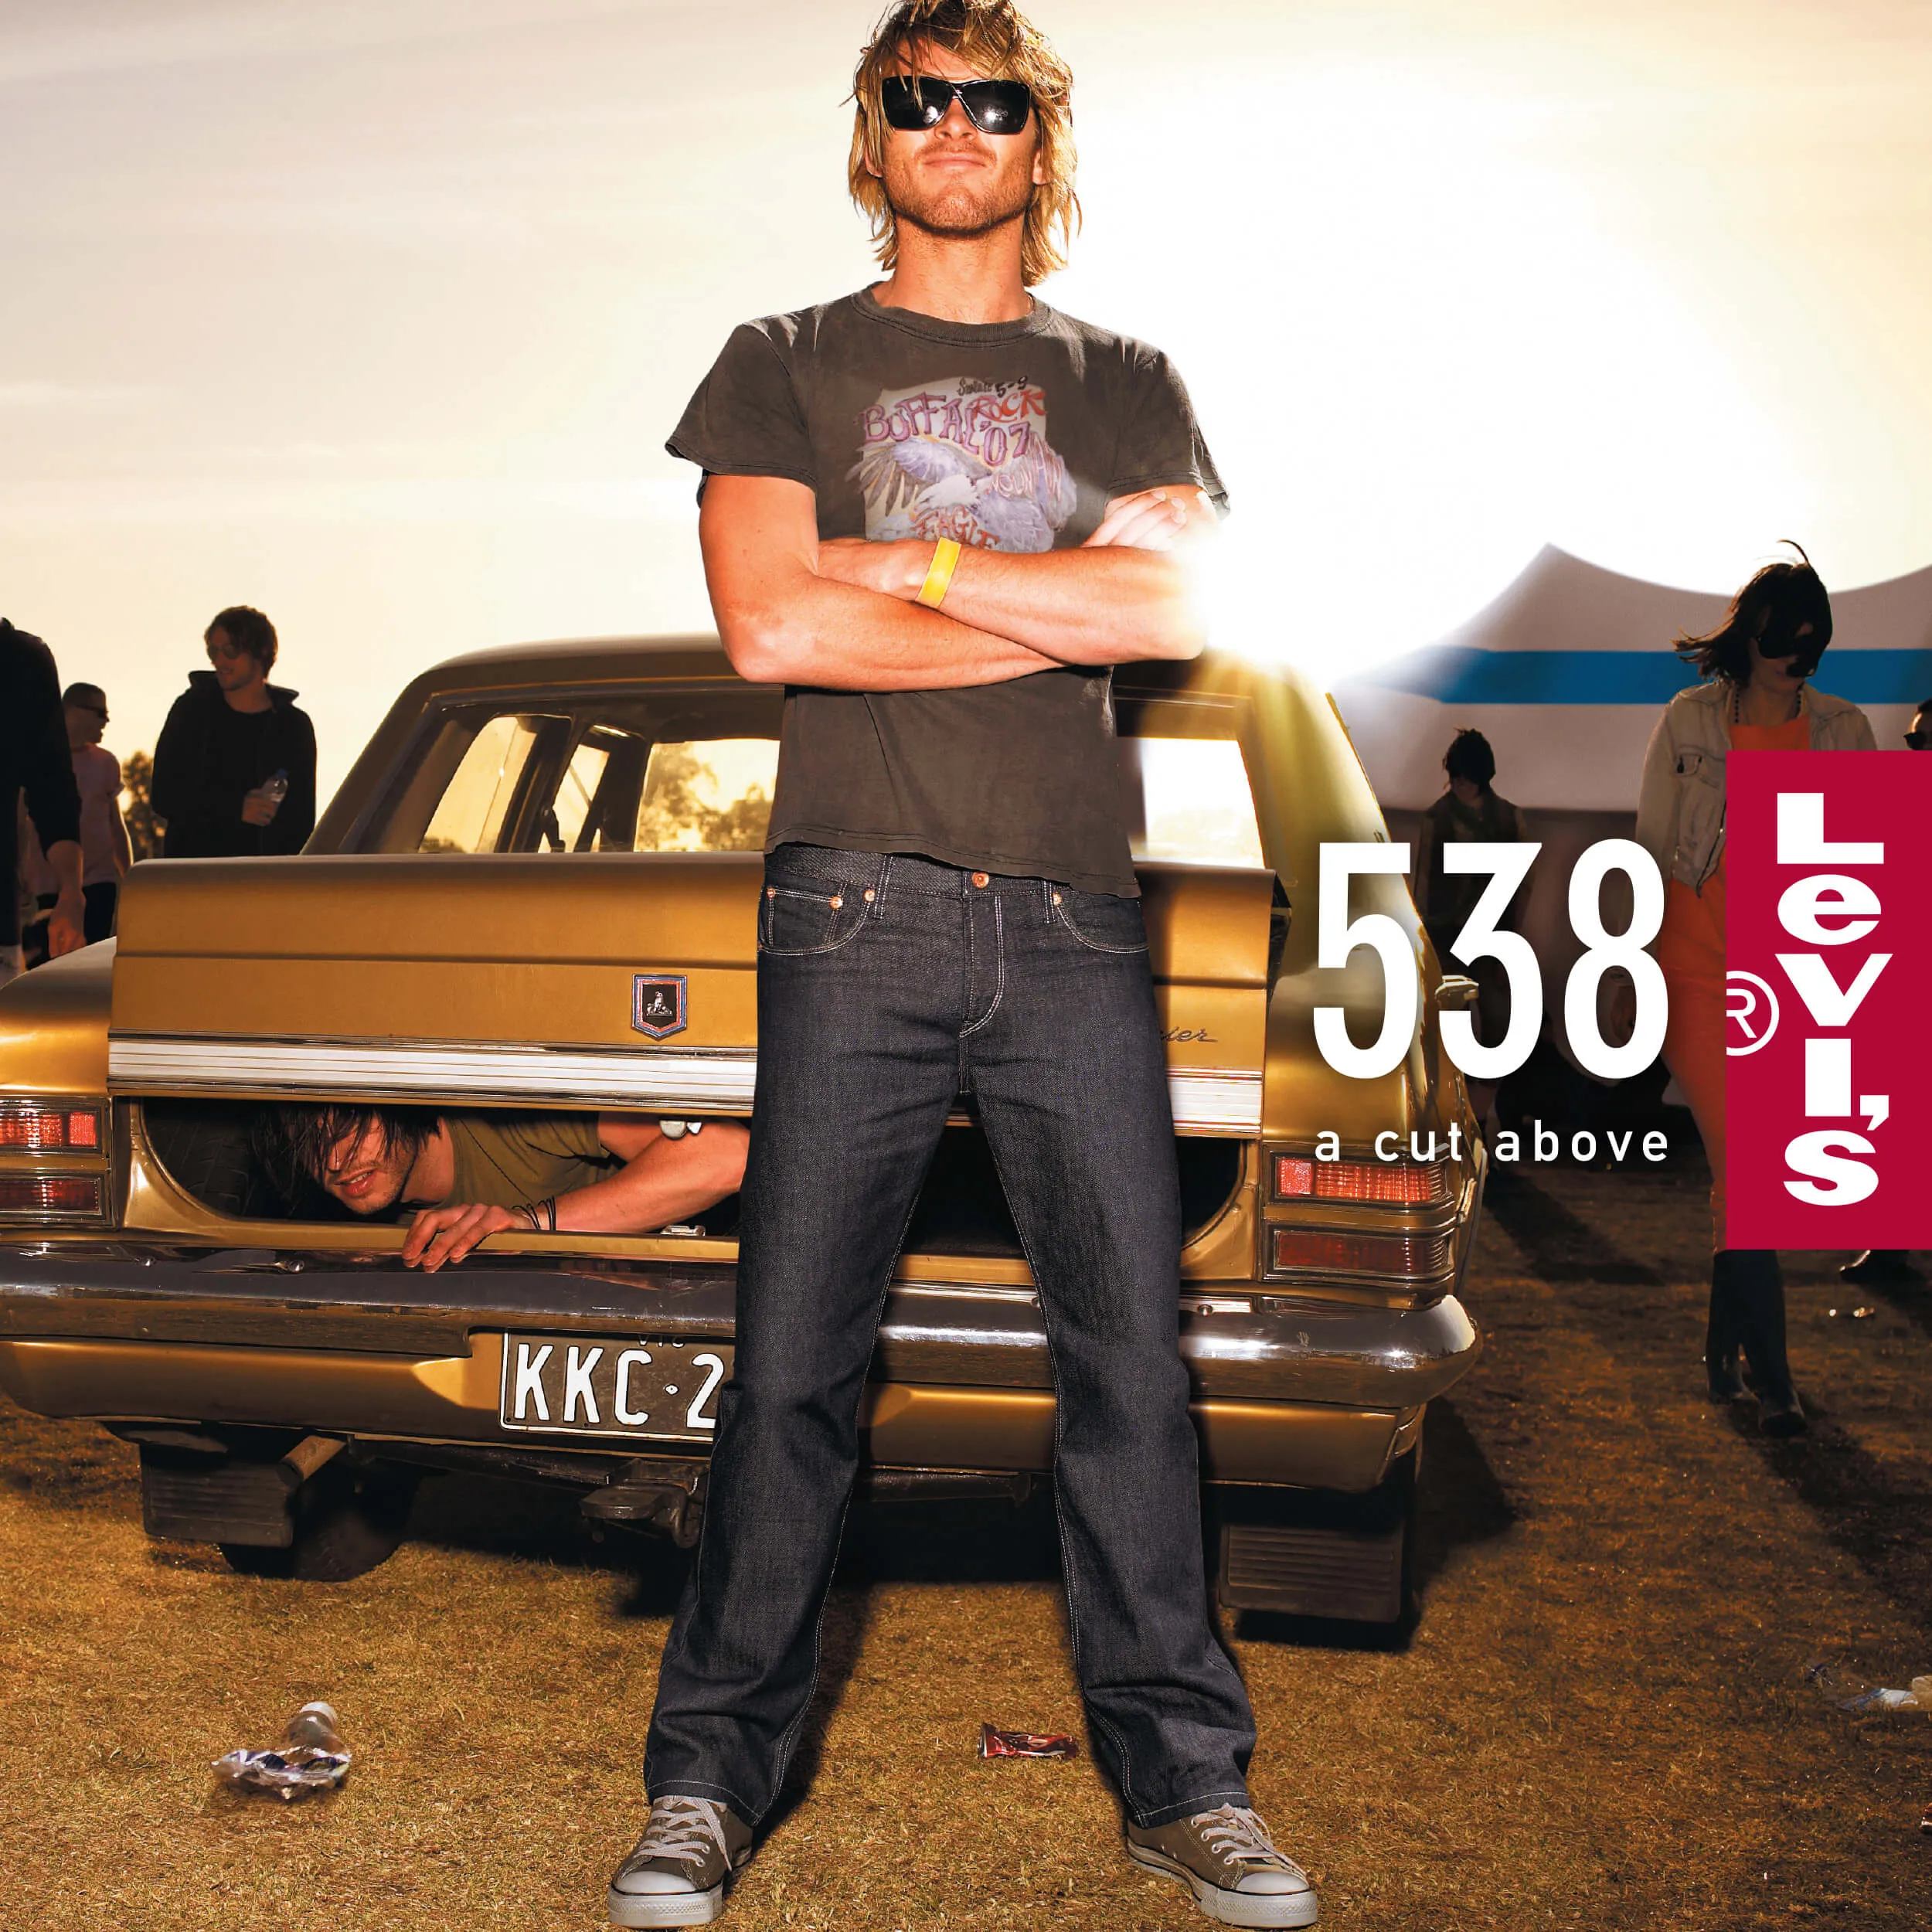 An outdoor advertising poster for Levi's 538 with a music festival theme